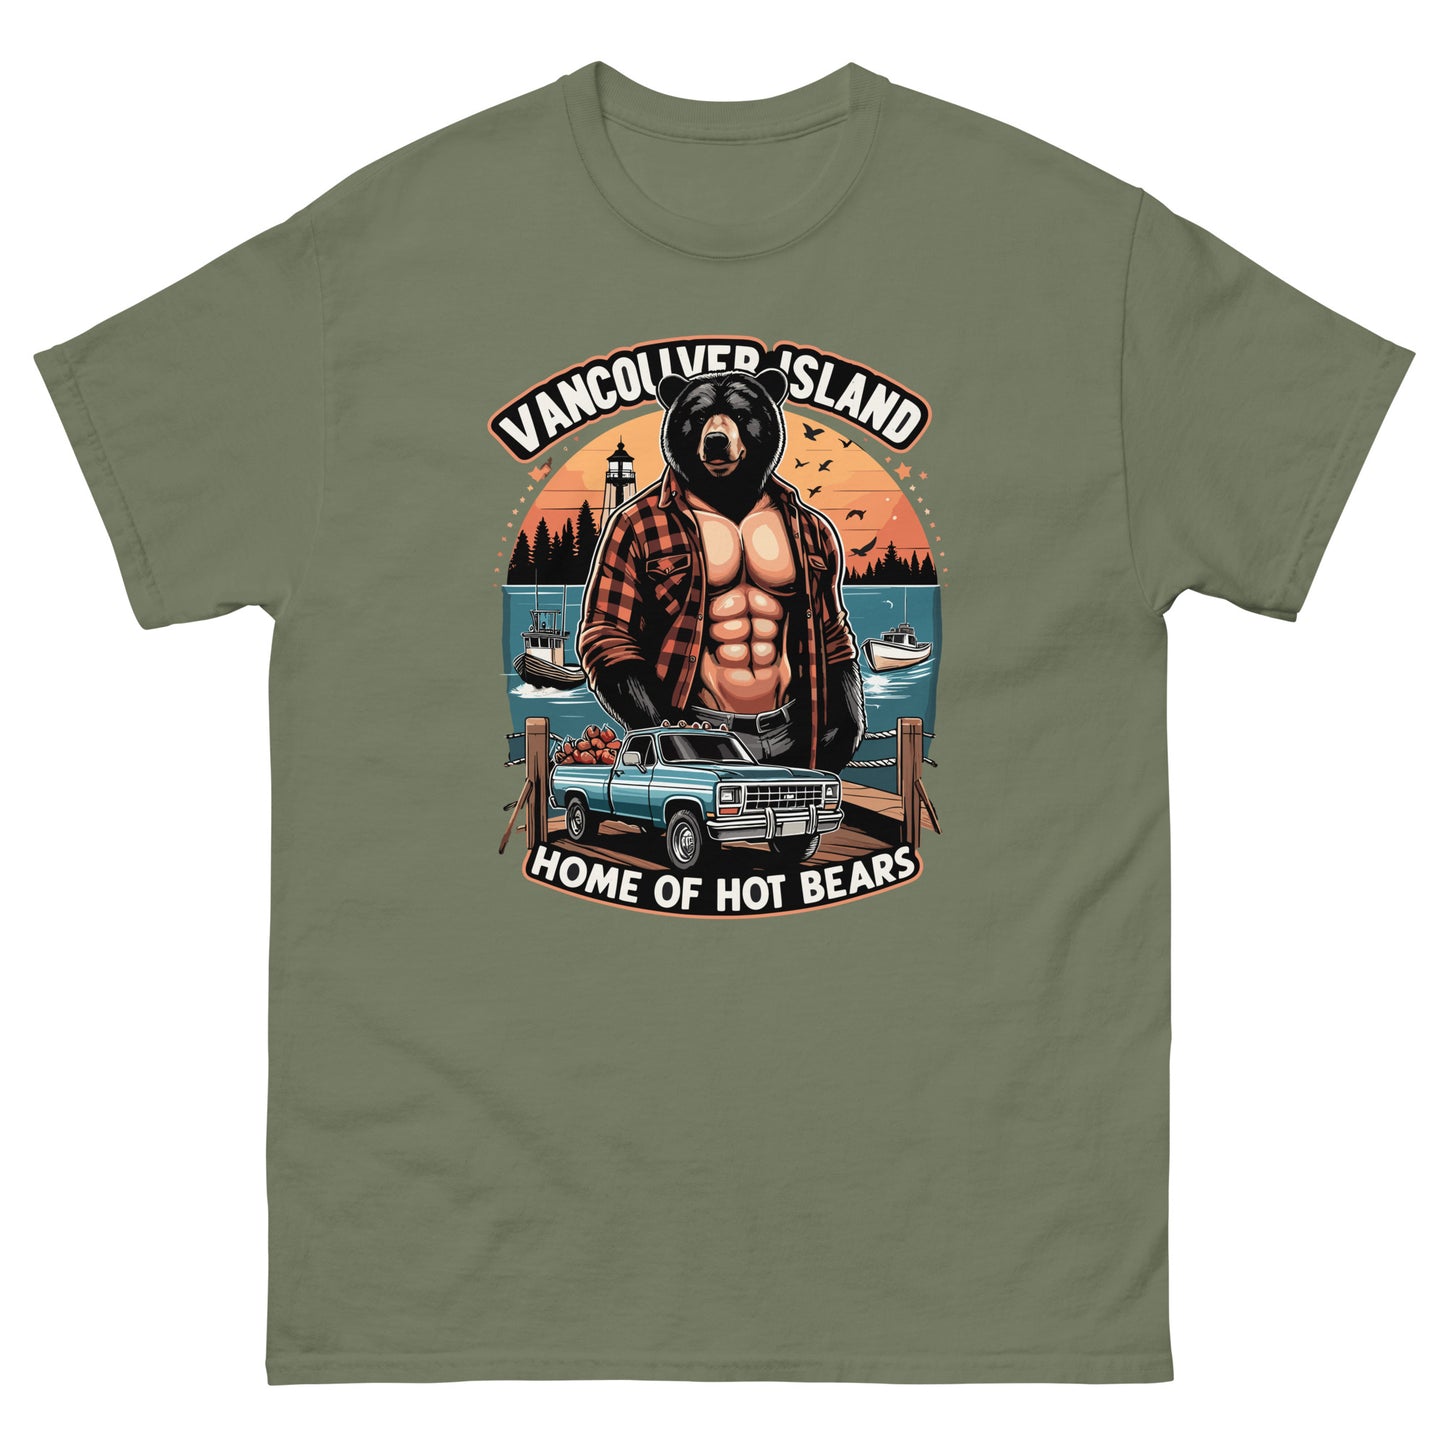 T-shirt with Vancouver Island Home of Bears print wtih a shirtless man with a bear head, truck and ocean behind, printed by Whistler Shirts